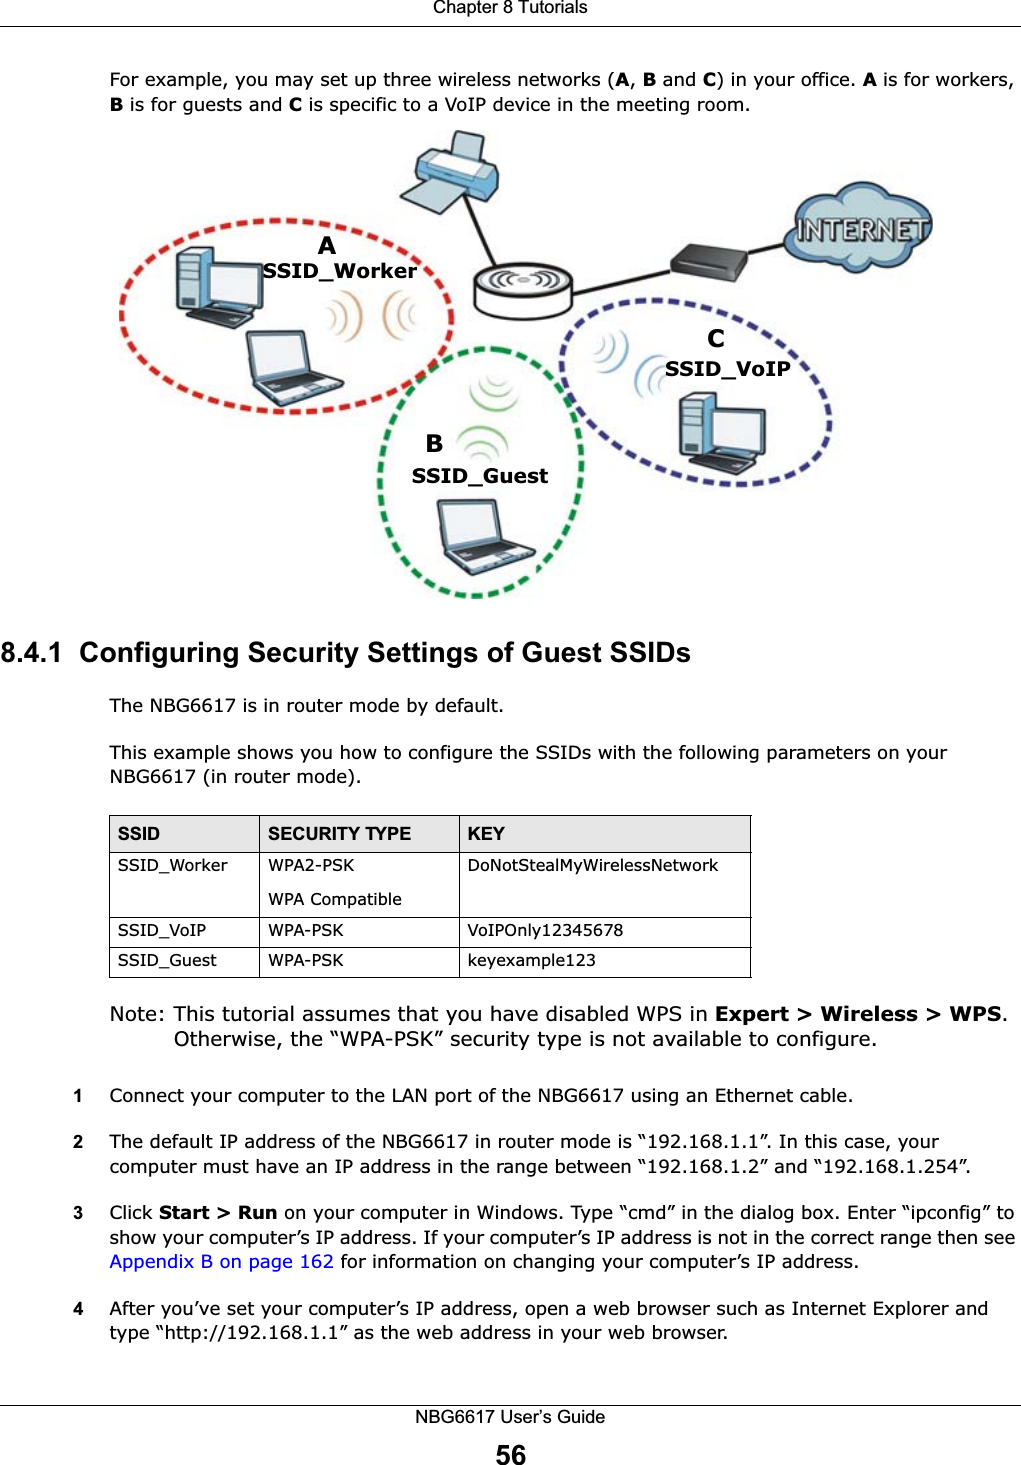 Chapter 8 TutorialsNBG6617 User’s Guide56For example, you may set up three wireless networks (A, B and C) in your office. A is for workers, B is for guests and C is specific to a VoIP device in the meeting room. 8.4.1  Configuring Security Settings of Guest SSIDsThe NBG6617 is in router mode by default.This example shows you how to configure the SSIDs with the following parameters on your NBG6617 (in router mode).Note: This tutorial assumes that you have disabled WPS in Expert &gt; Wireless &gt; WPS. Otherwise, the “WPA-PSK” security type is not available to configure.1Connect your computer to the LAN port of the NBG6617 using an Ethernet cable. 2The default IP address of the NBG6617 in router mode is “192.168.1.1”. In this case, your computer must have an IP address in the range between “192.168.1.2” and “192.168.1.254”.3Click Start &gt; Run on your computer in Windows. Type “cmd” in the dialog box. Enter “ipconfig” to show your computer’s IP address. If your computer’s IP address is not in the correct range then see Appendix B on page 162 for information on changing your computer’s IP address.4After you’ve set your computer’s IP address, open a web browser such as Internet Explorer and type “http://192.168.1.1” as the web address in your web browser.ABCSSID_GuestSSID_WorkerSSID_VoIPSSID SECURITY TYPE KEYSSID_Worker WPA2-PSKWPA Compatible DoNotStealMyWirelessNetworkSSID_VoIP WPA-PSK VoIPOnly12345678SSID_Guest WPA-PSK keyexample123